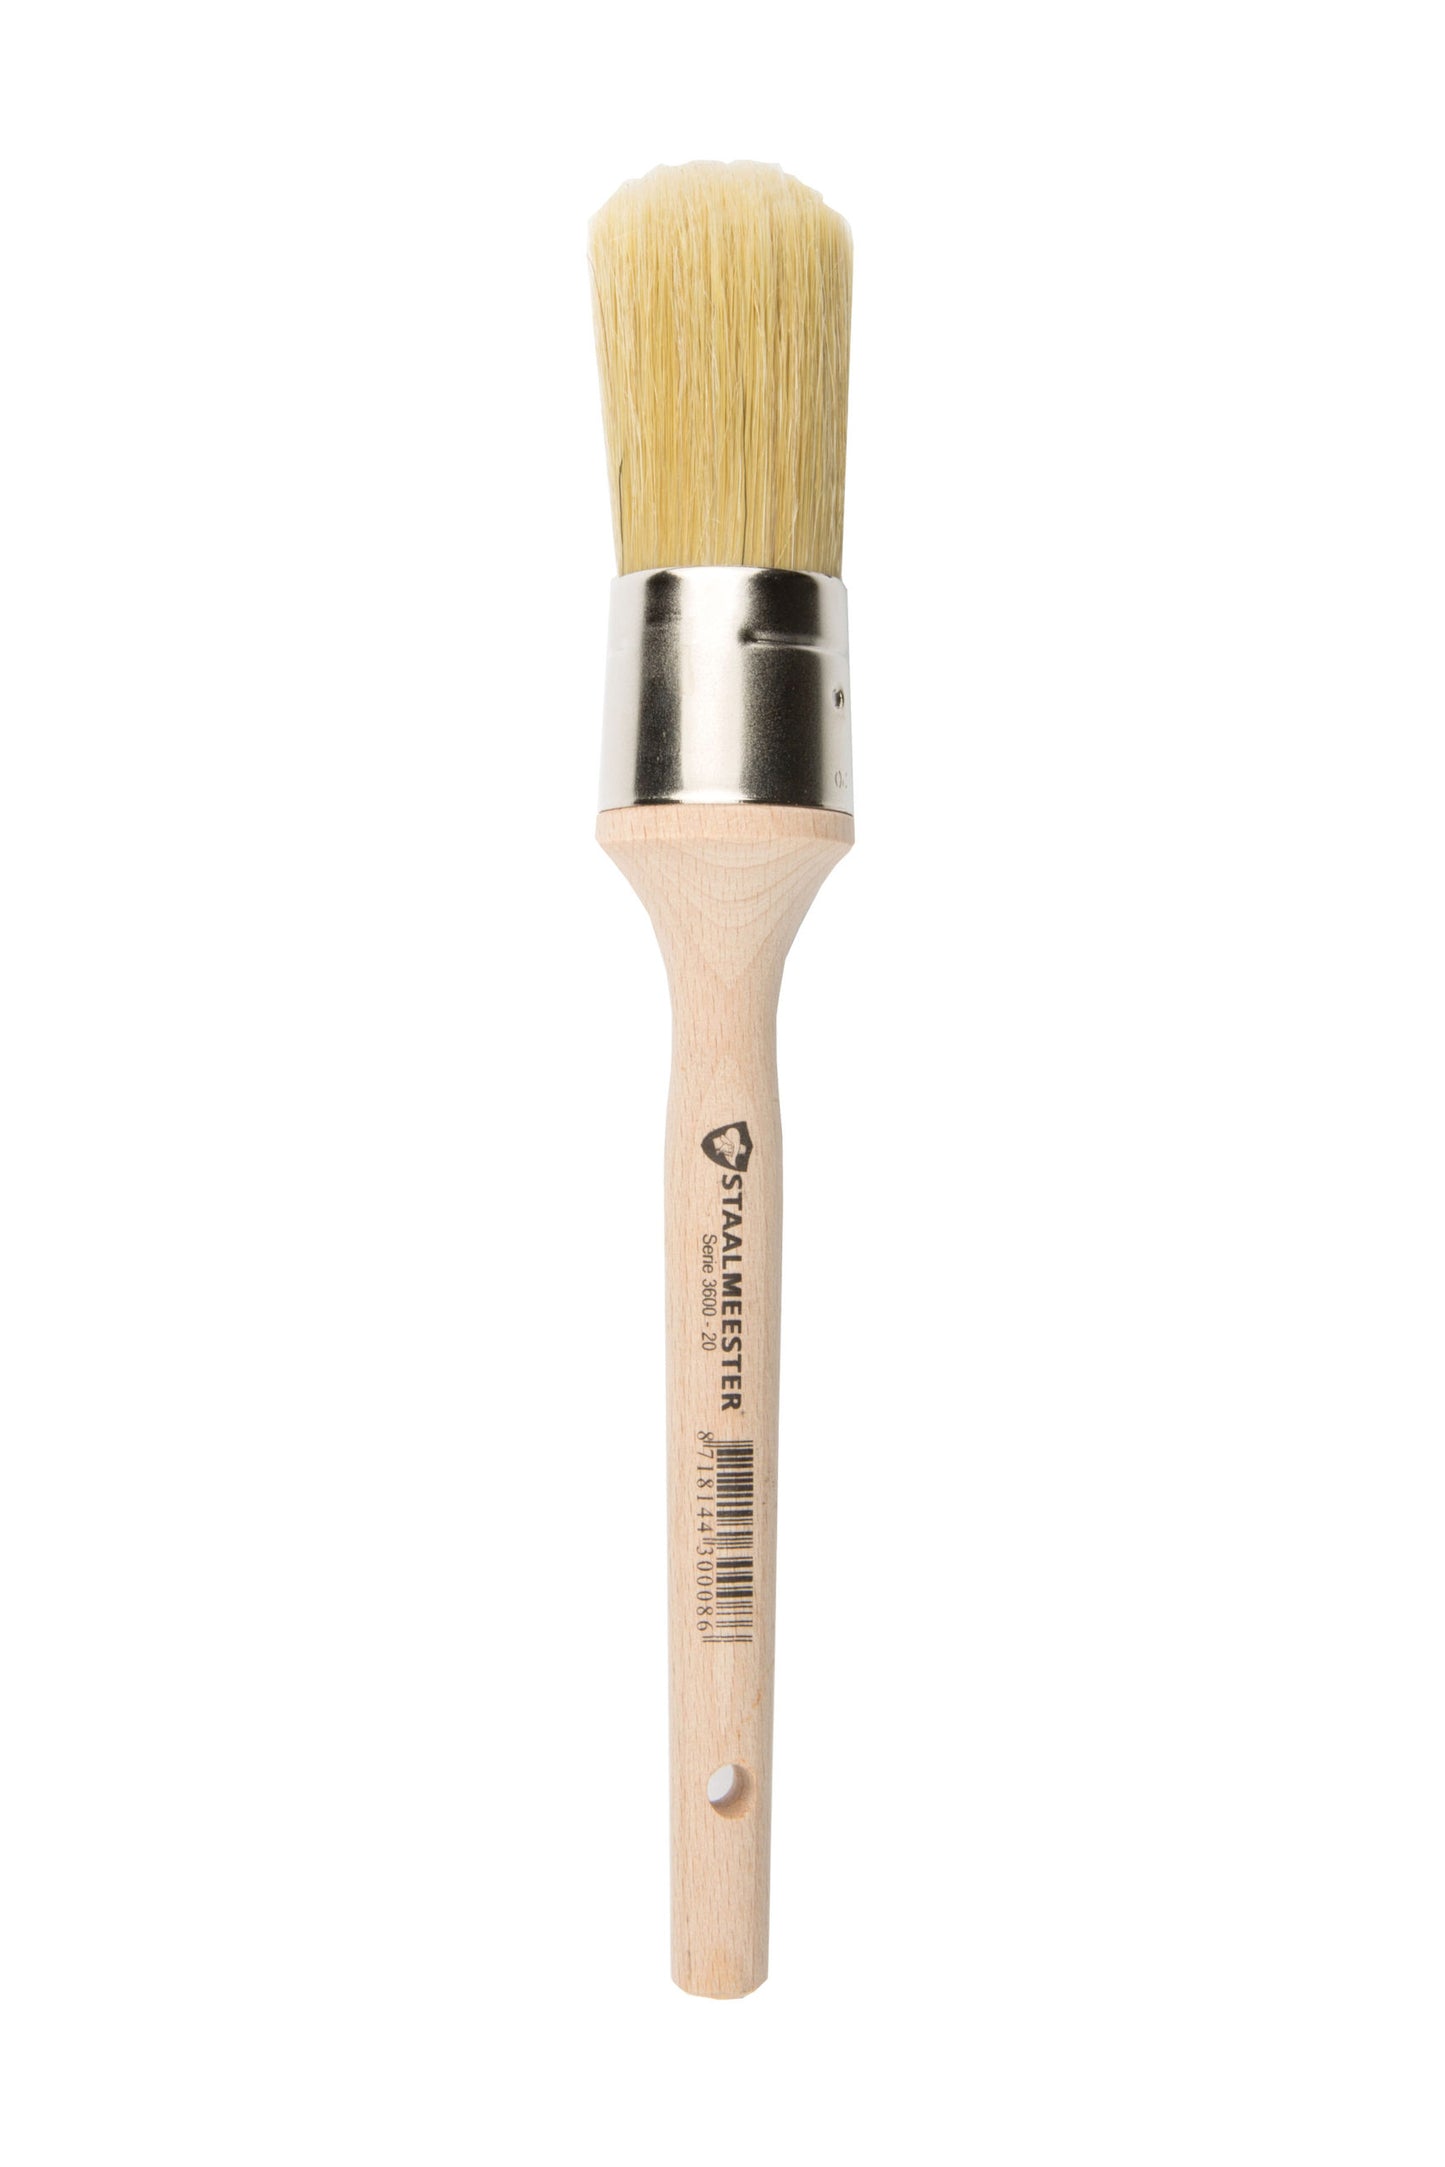 Natural Series Wax Brush Round #20 (1.5in) by Staalmeester